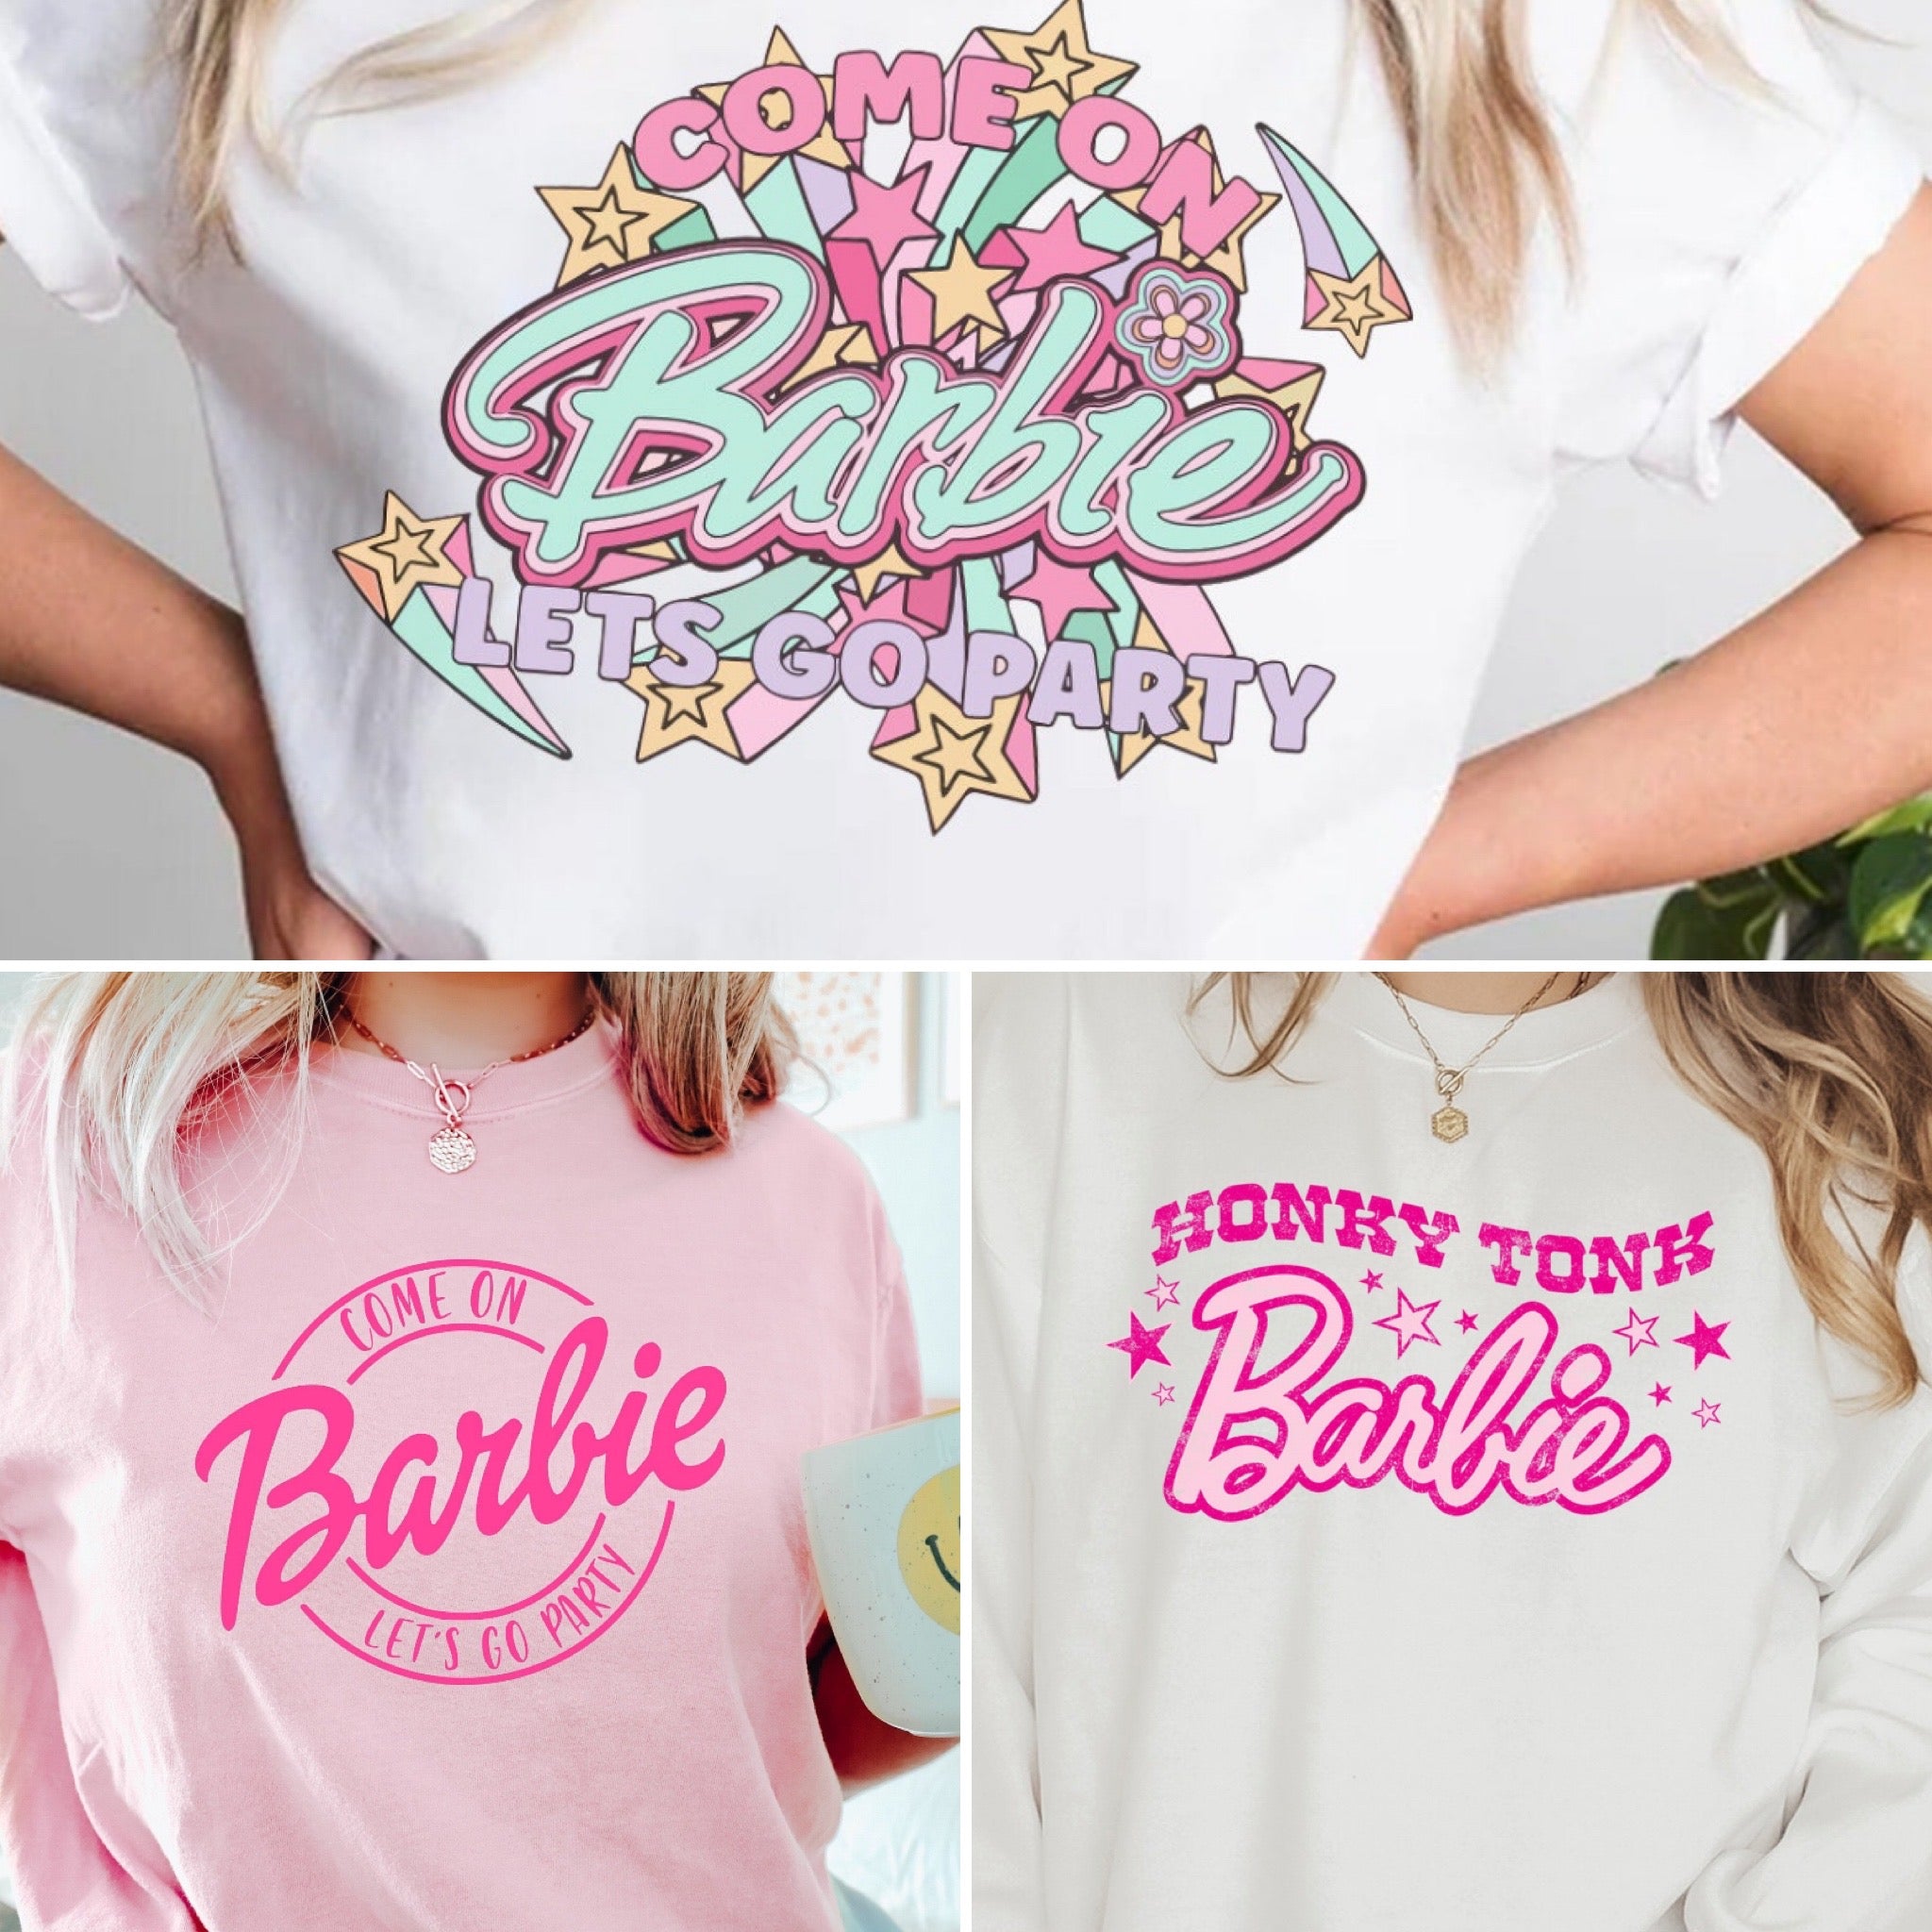 Barbie Collection